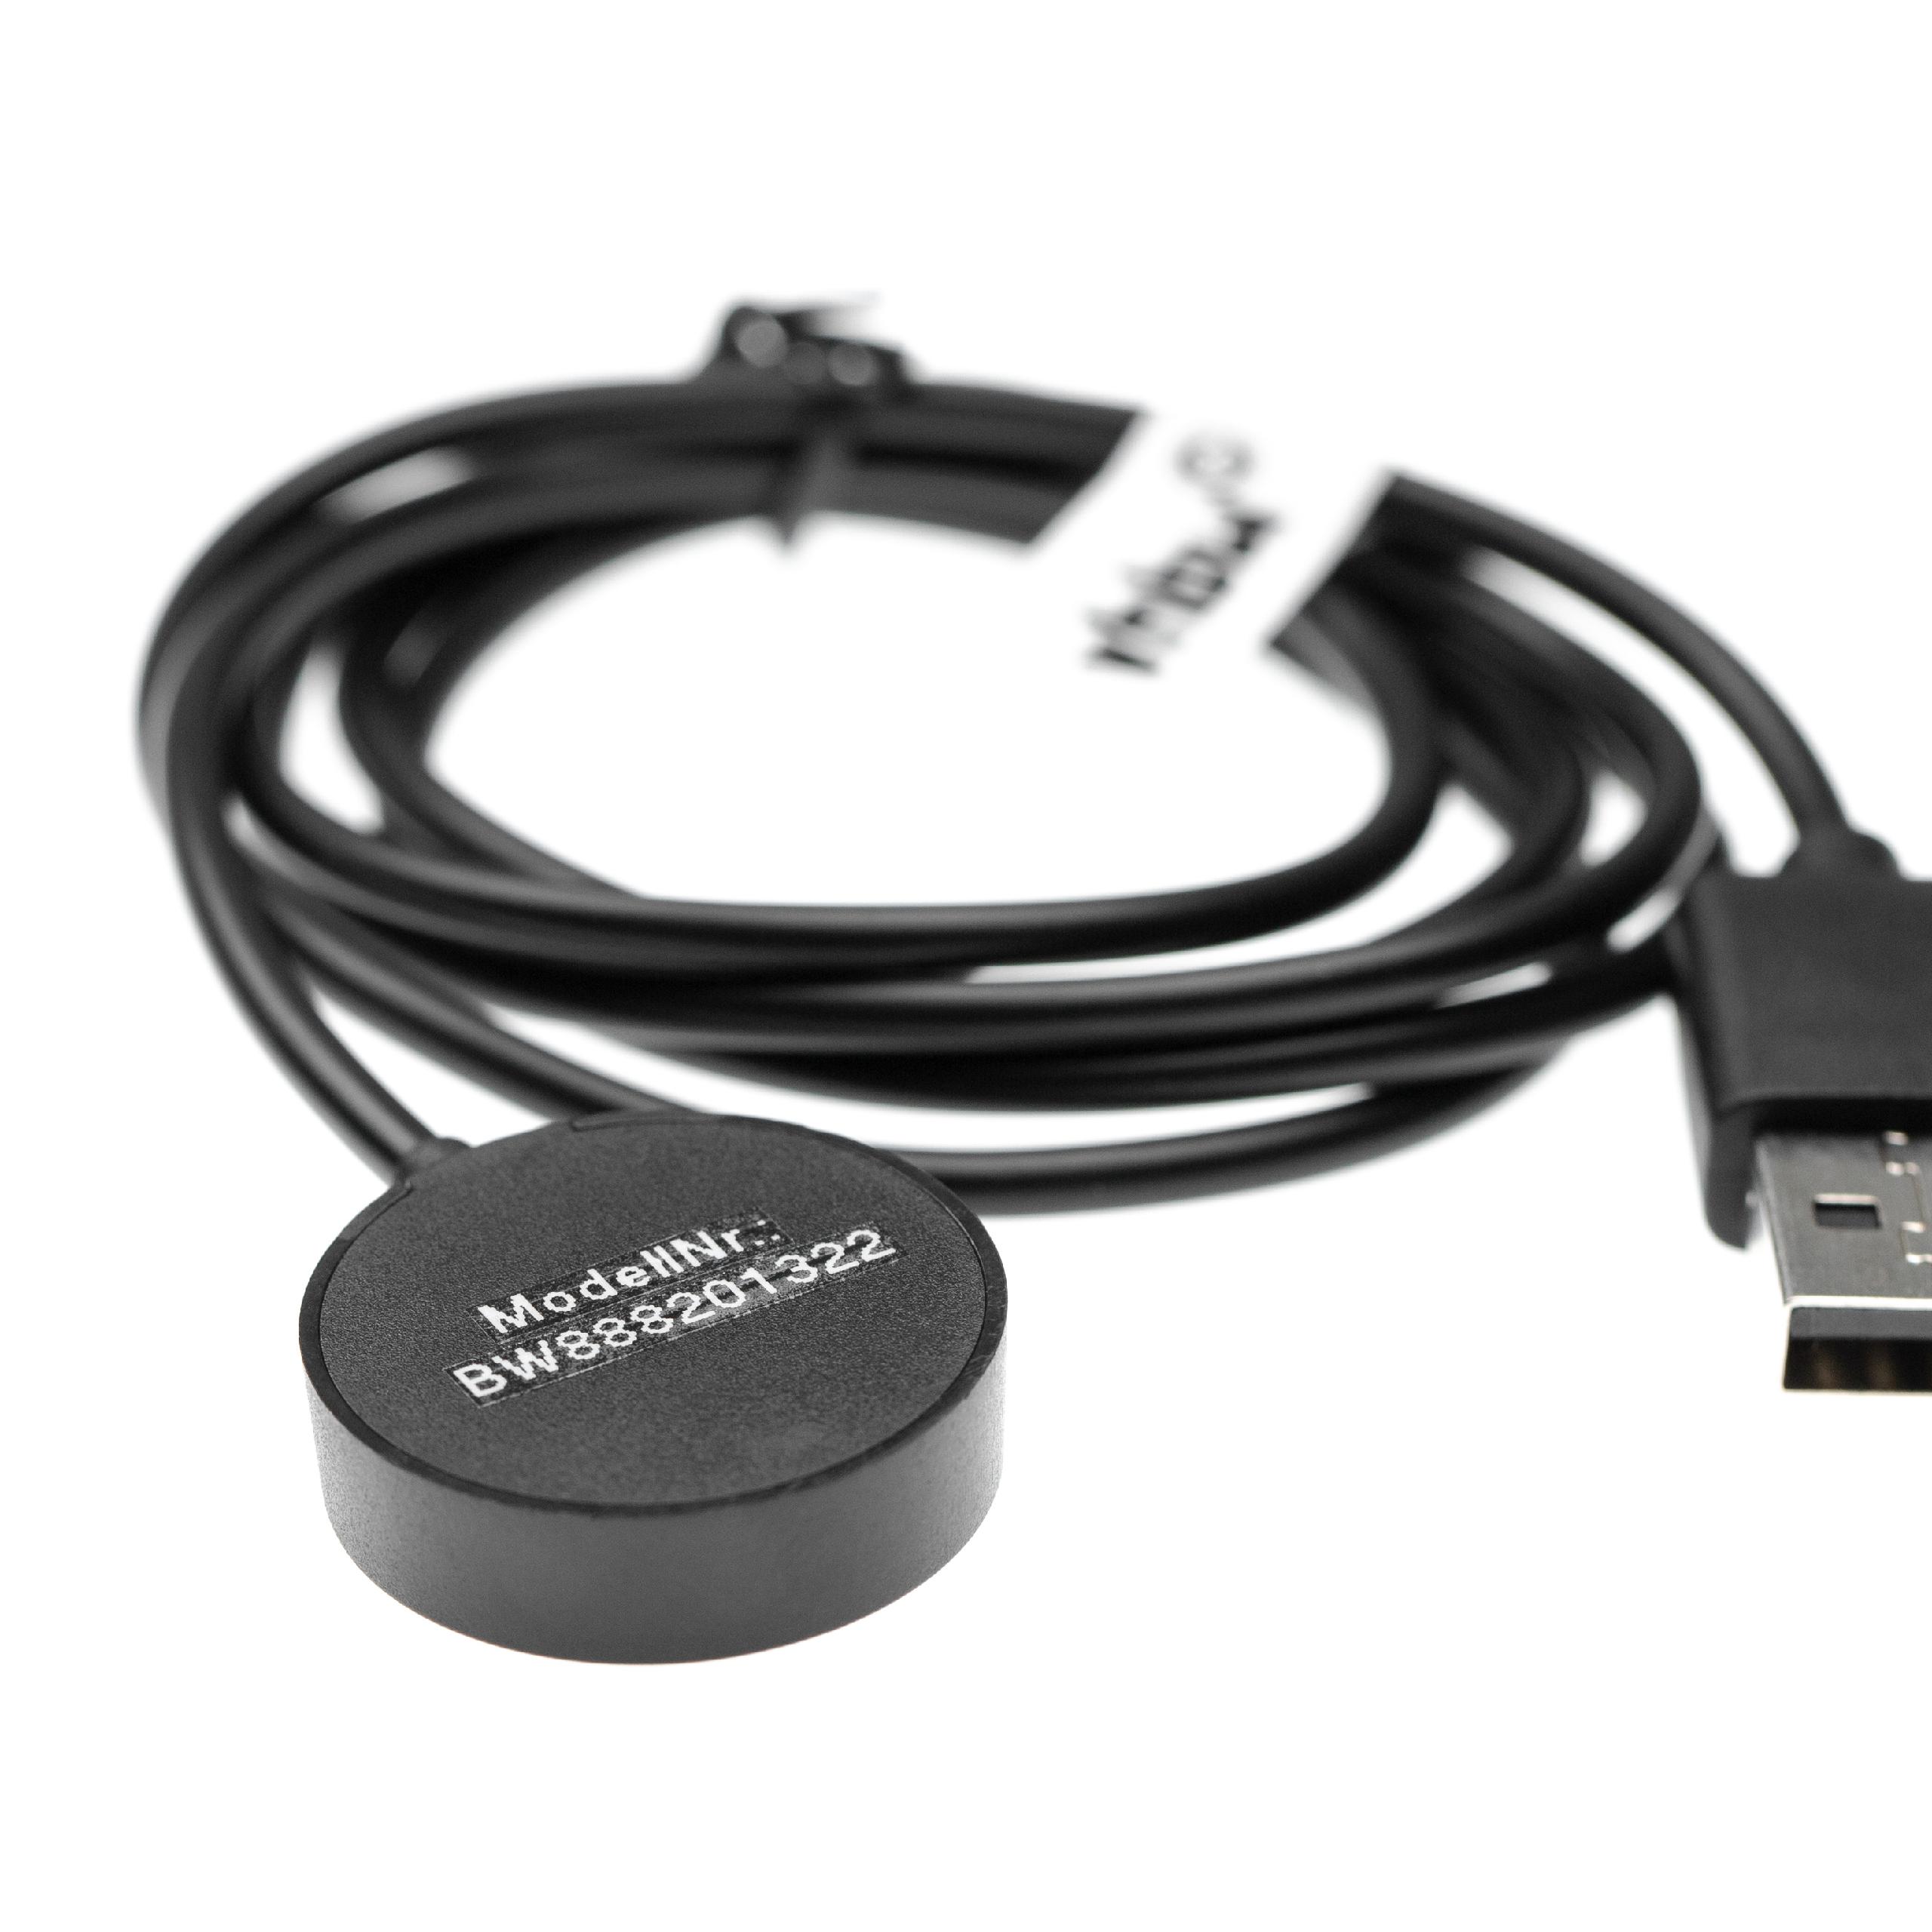 Charging Cradle as Replacement for Emporio Armani ART9801 - 100 cm Cable Length, Magnetic, USB Plug